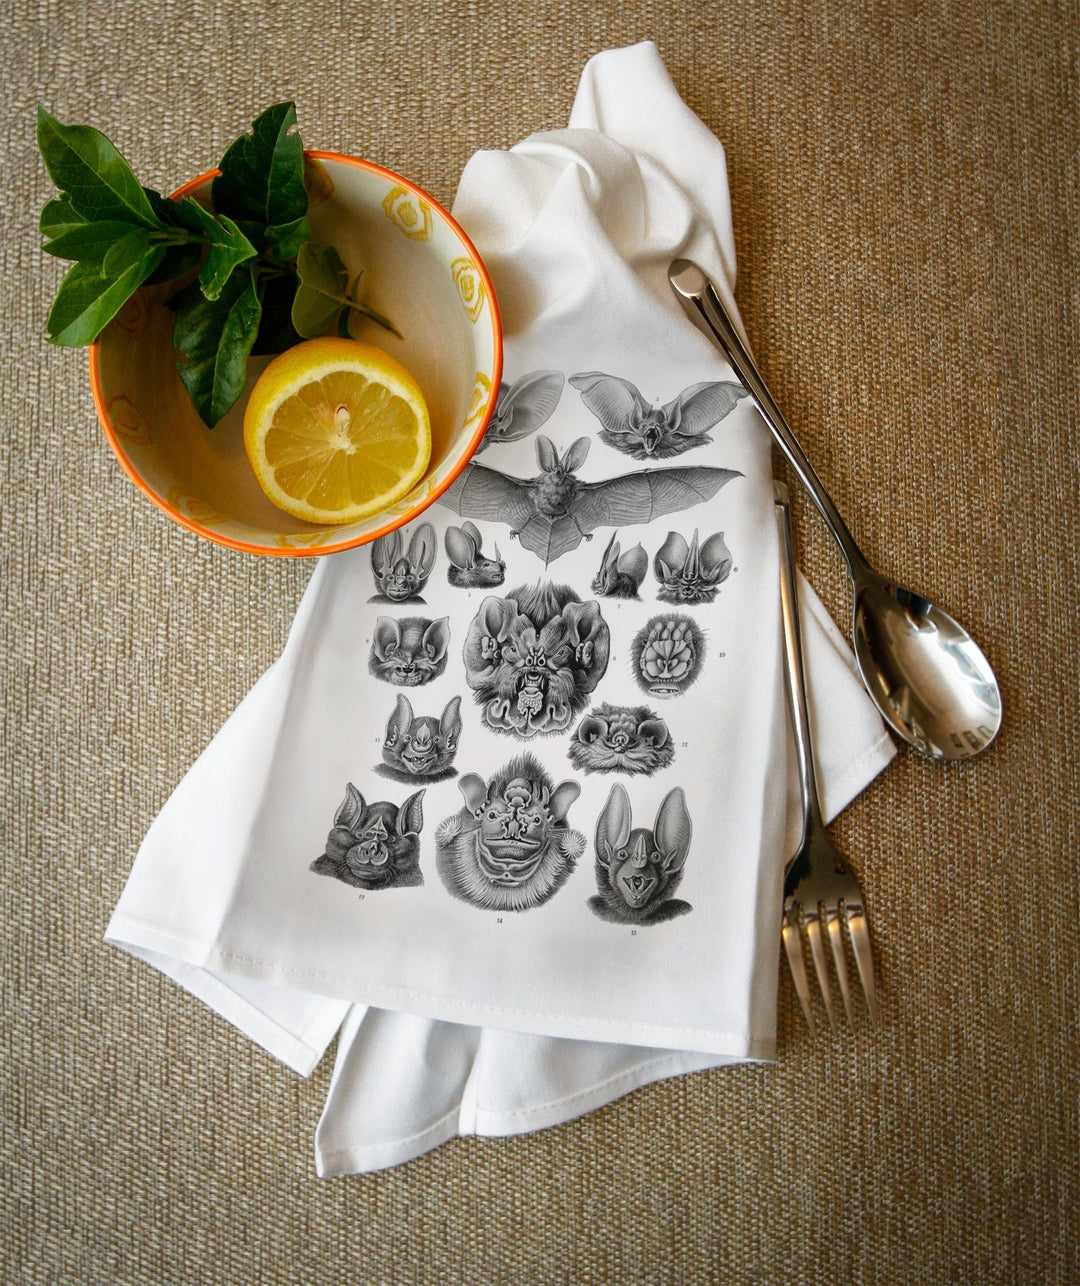 Art Forms of Nature, Chiroptera (Bats), Ernst Haeckel Artwork, Towels and Aprons Kitchen Lantern Press 